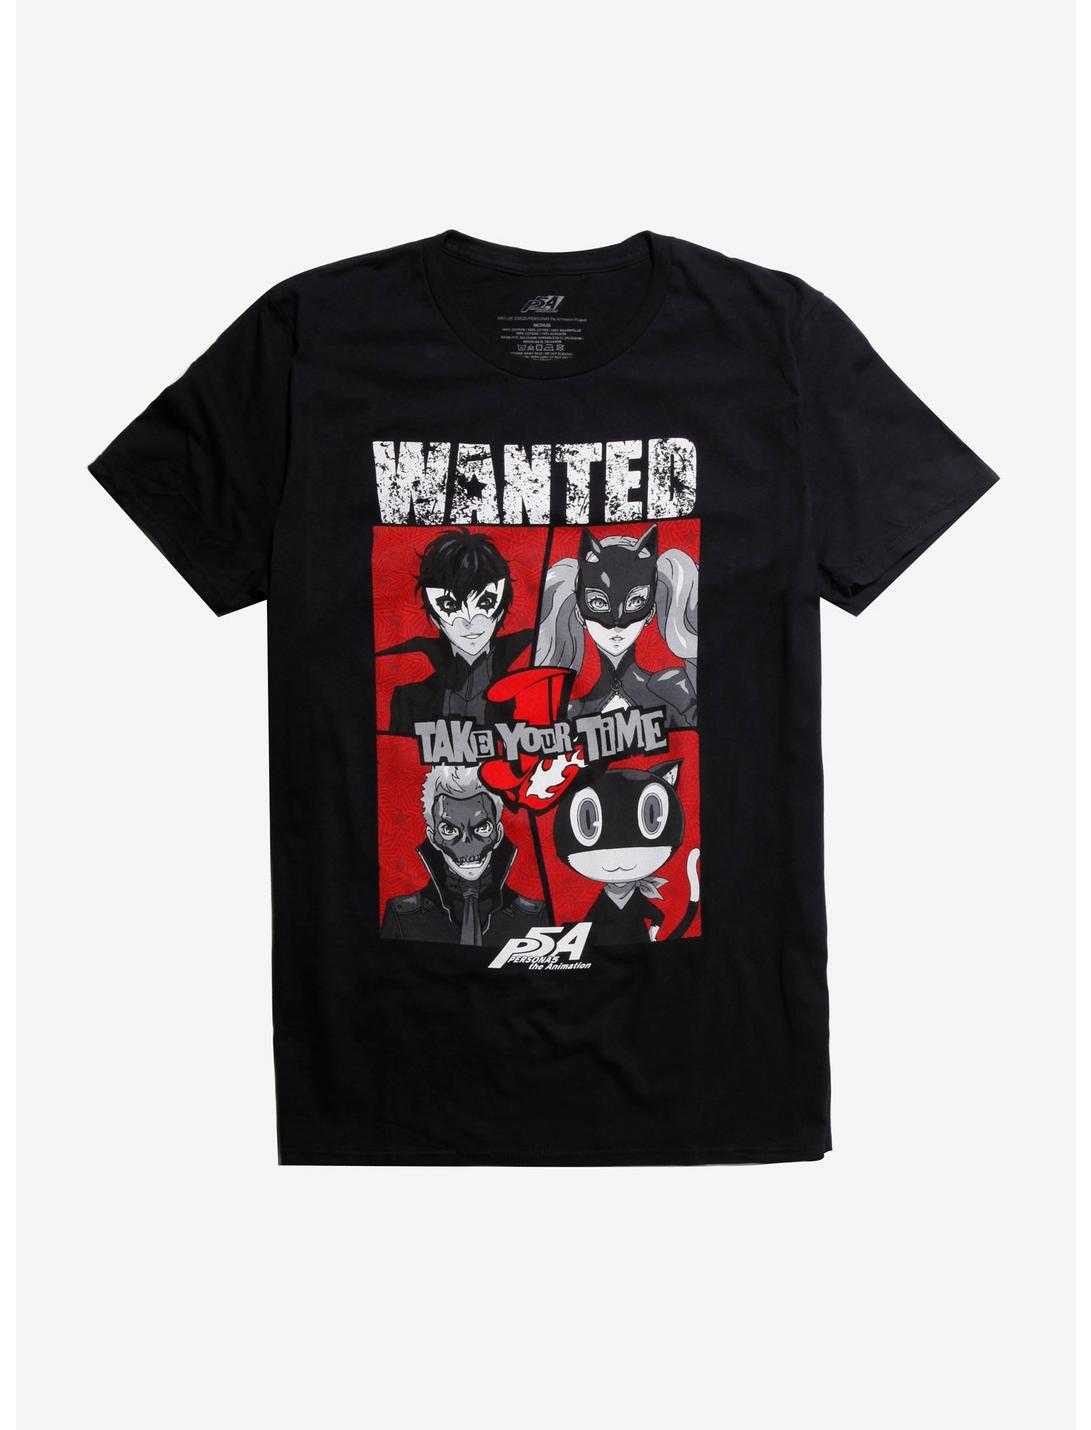 Persona 5 Wanted Take Your Time T-Shirt, BLACK, hi-res